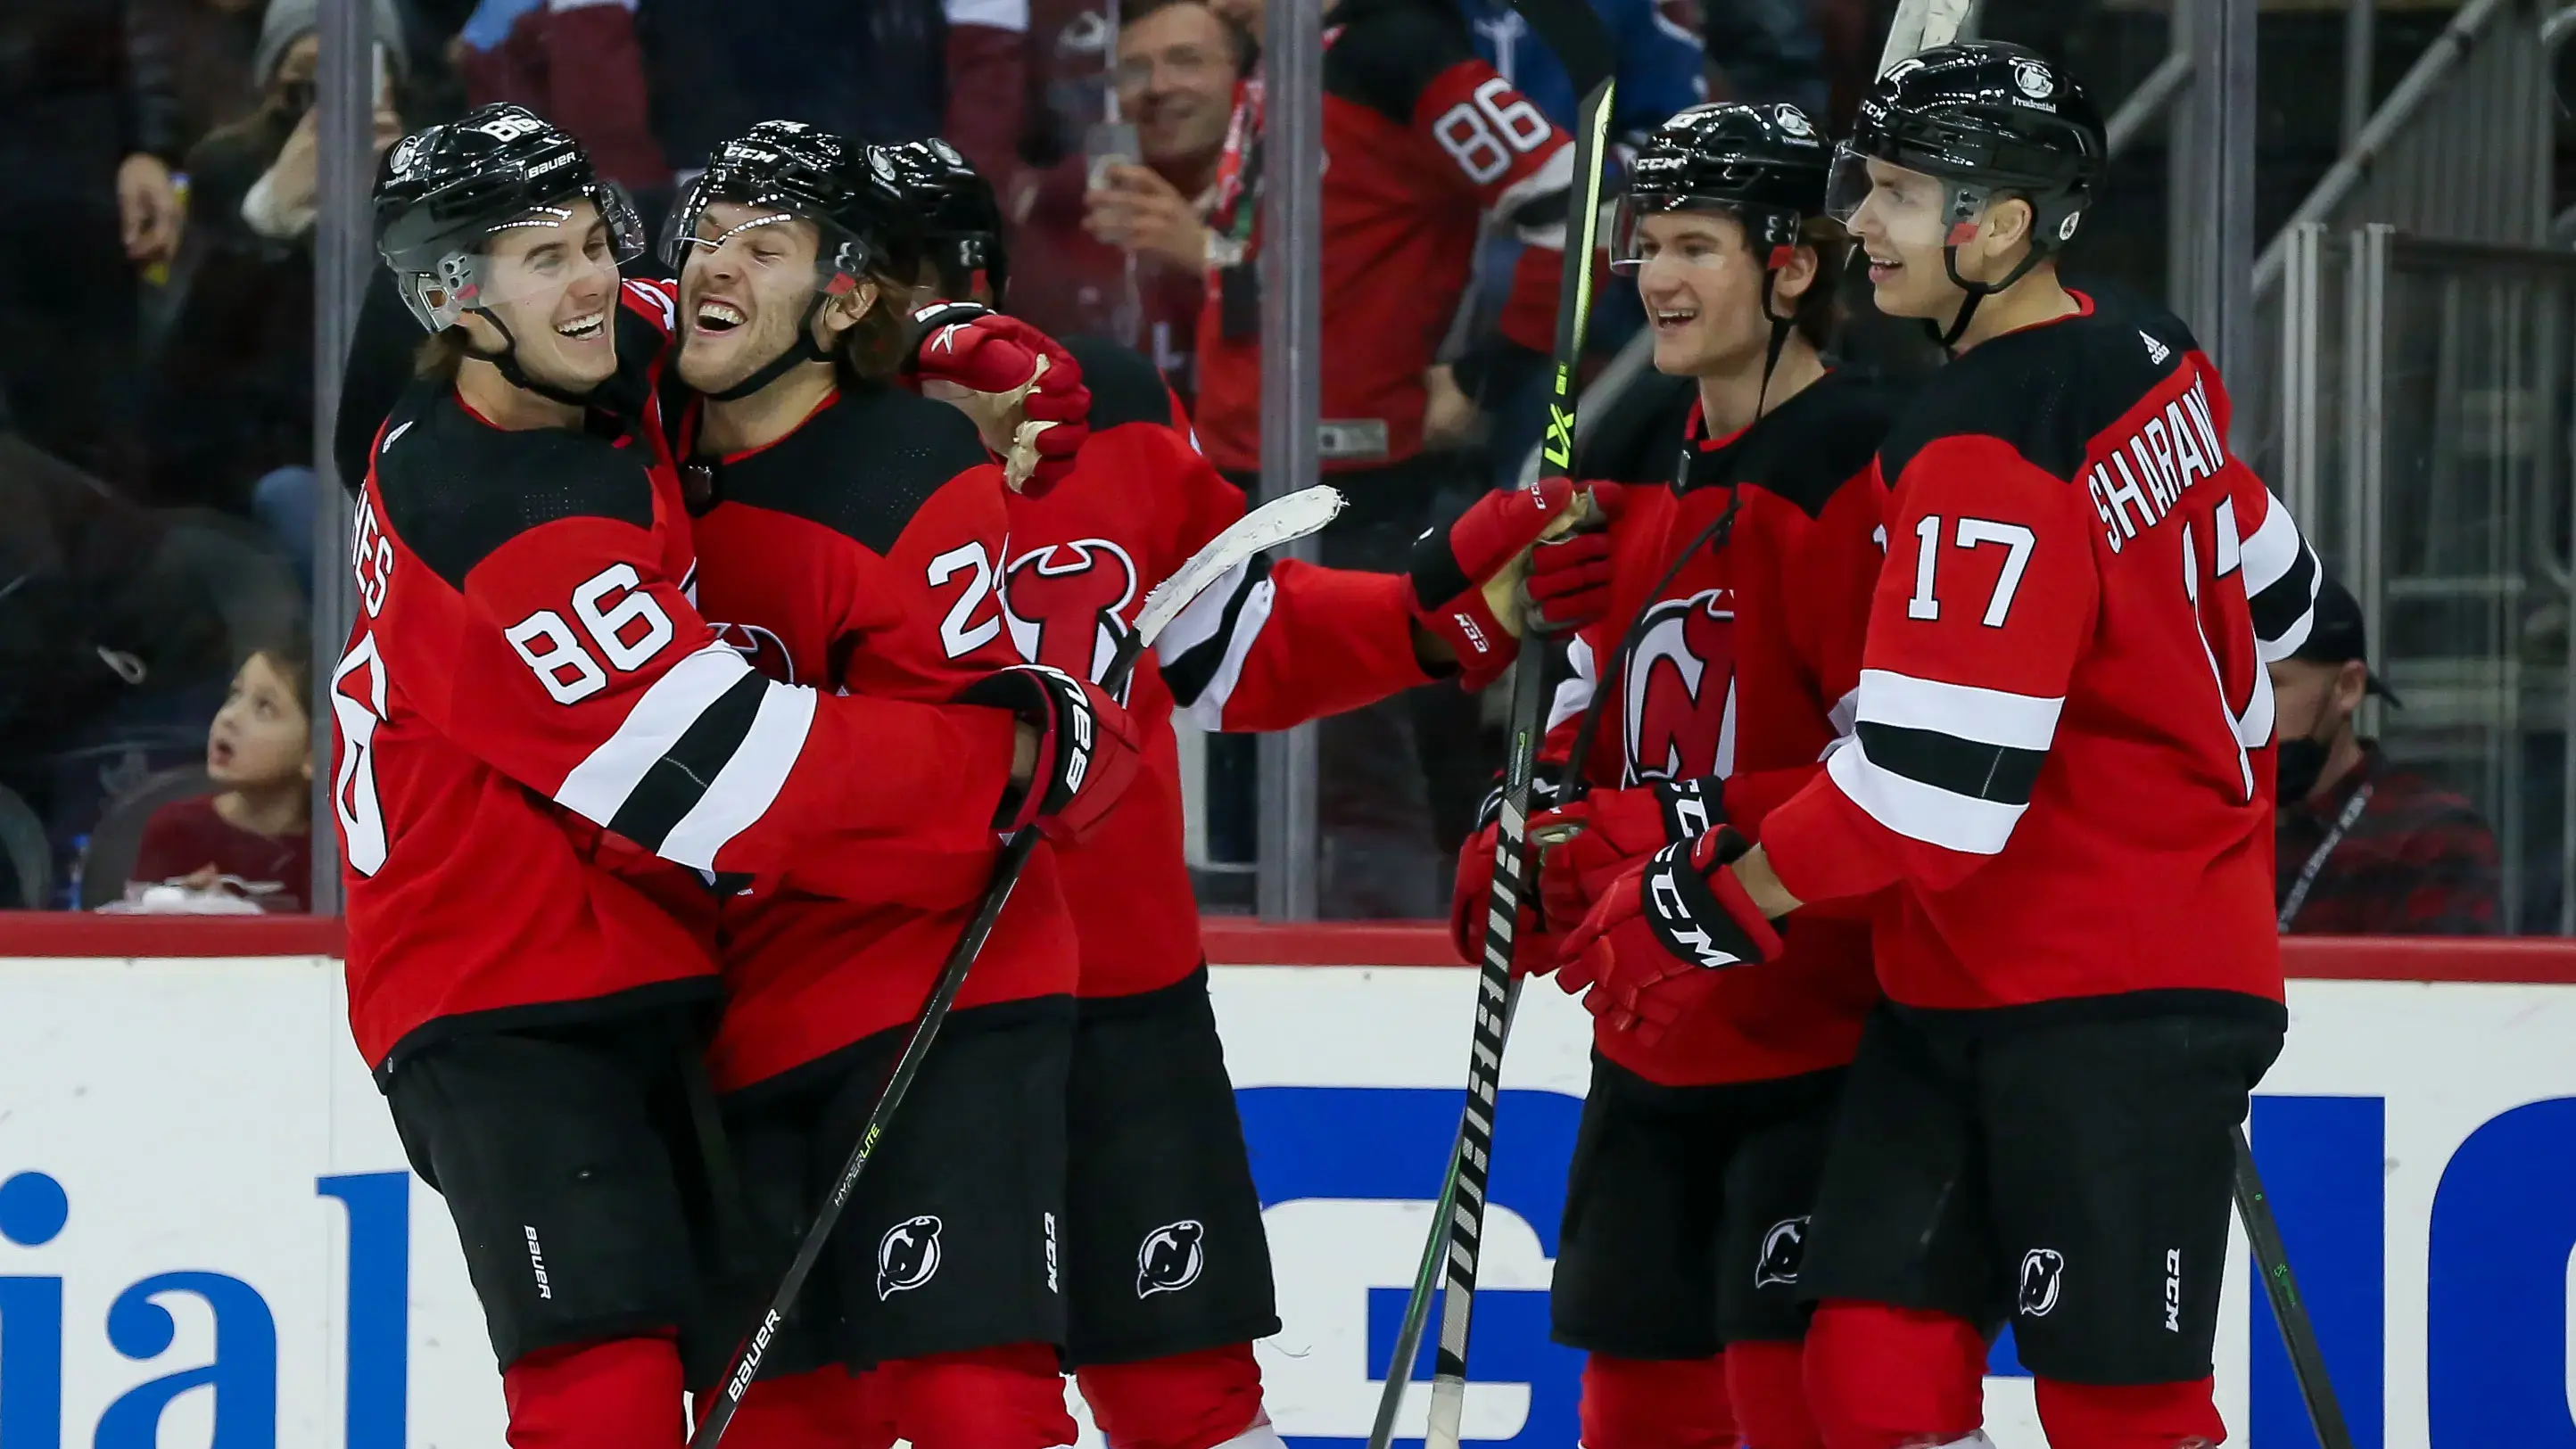 Mar 8, 2022; Newark, New Jersey, USA; New Jersey Devils defenseman Ty Smith (24) celebrates with New Jersey Devils center Jack Hughes (86), New Jersey Devils center Dawson Mercer (18) and New Jersey Devils center Yegor Sharangovich (17) after scoring a goal against Colorado Avalanche during the second period at Prudential Center. / Tom Horak-USA TODAY Sports